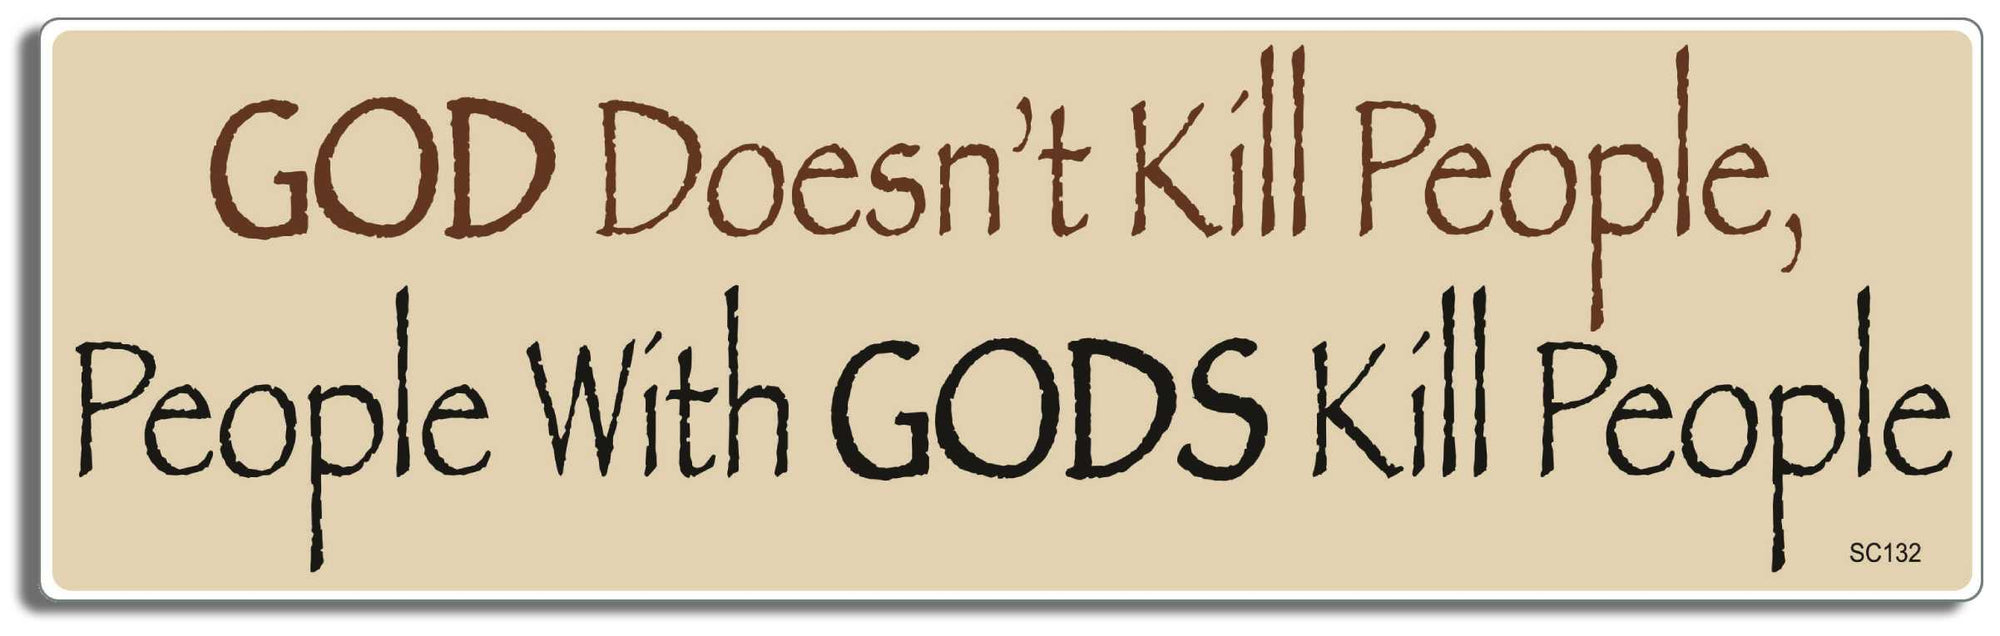 God doesn't kill people, people with Gods kill people - 3" x 10" Bumper Sticker--Car Magnet- -  Decal Bumper Sticker-political Bumper Sticker Car Magnet God doesn't kill people, people with-  Decal for carsconservative, liberal, Political